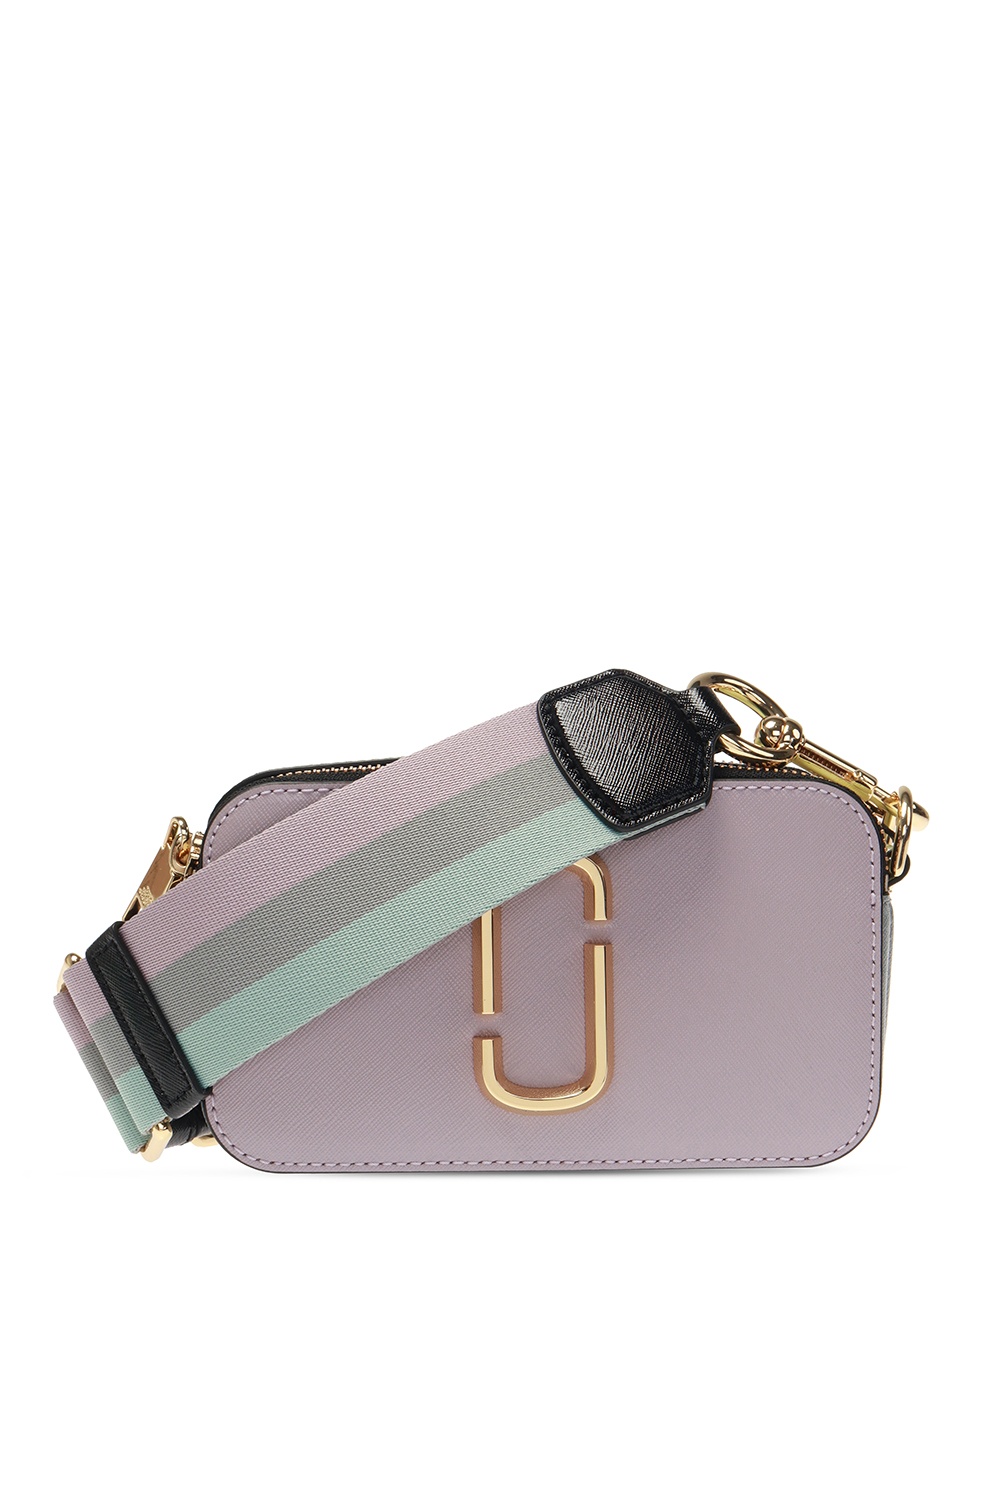 Marc Jacobs] The snapshot camera cross bag M0012007 Free Gifts